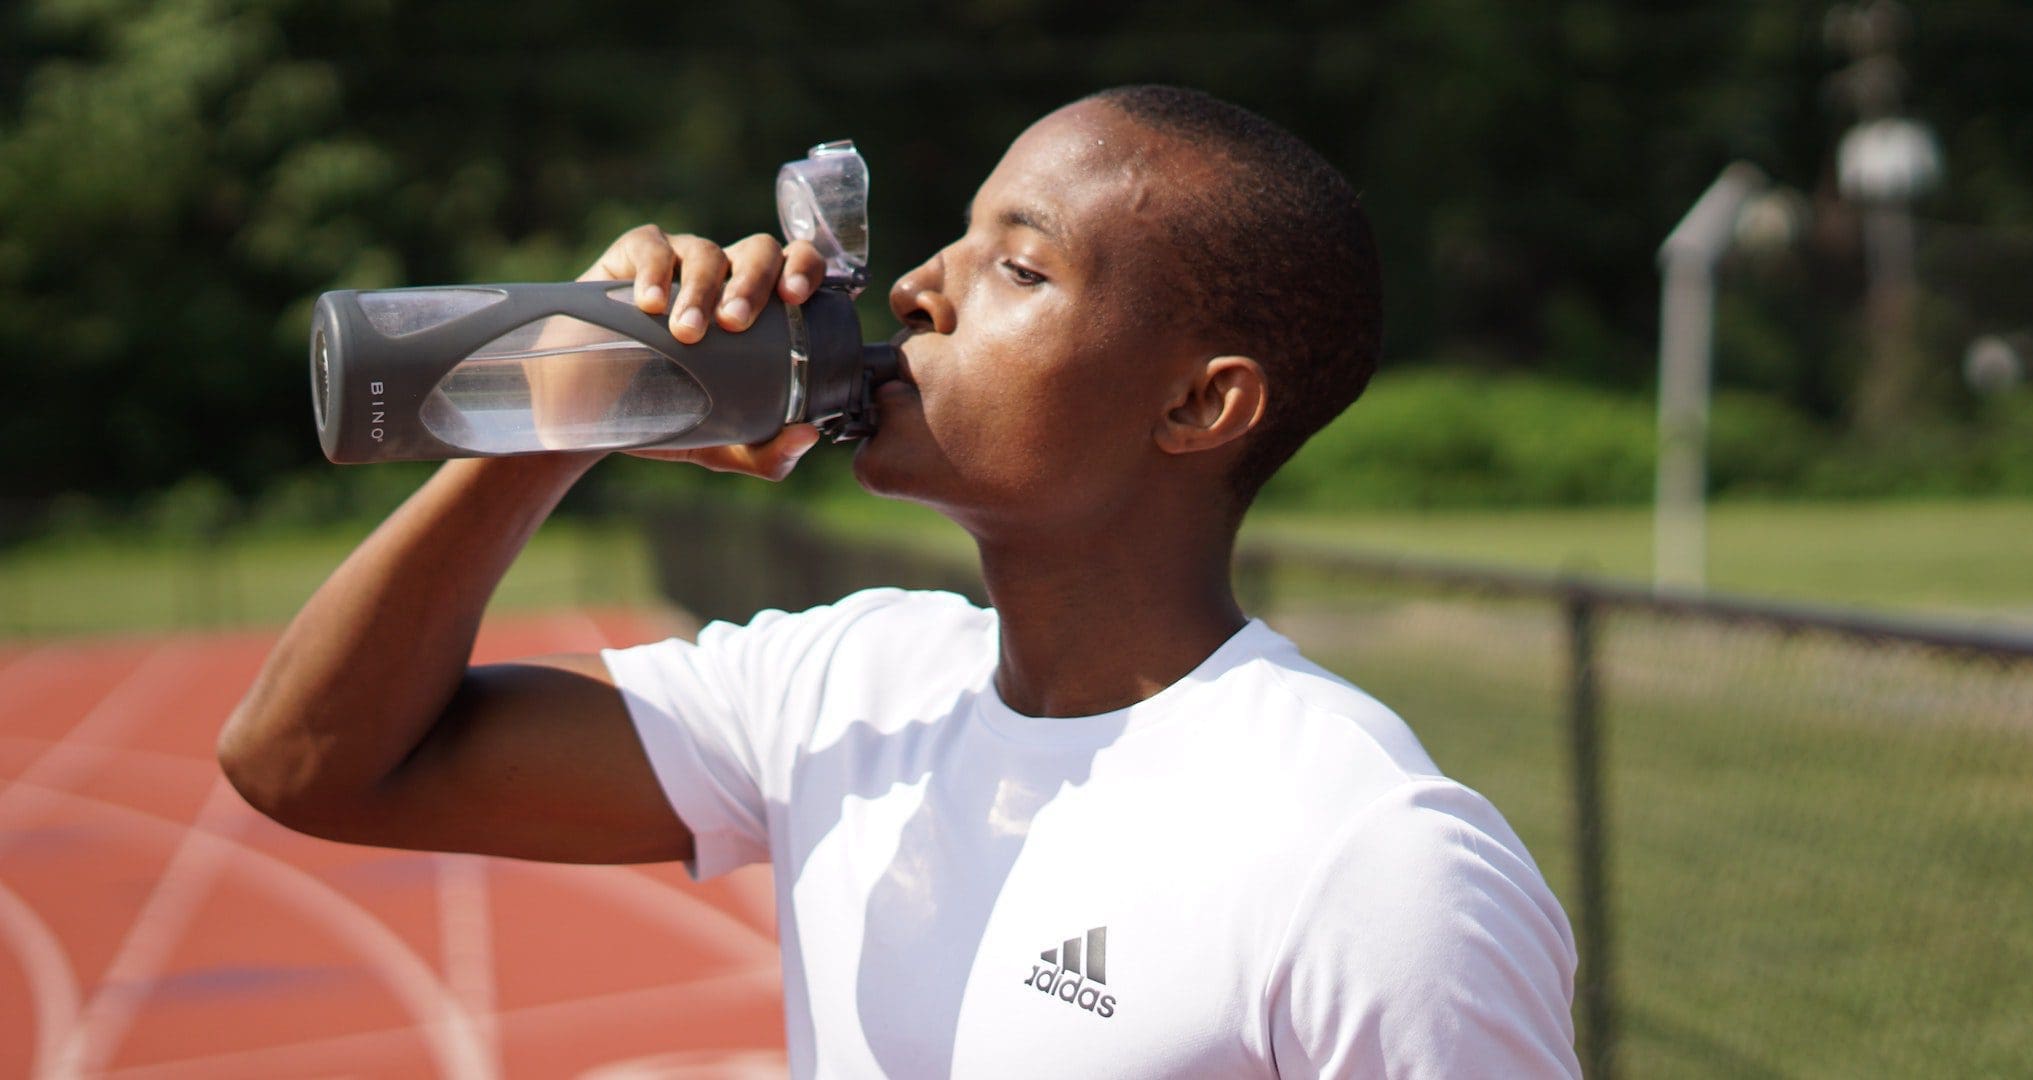 man standing on a running track drinking a refillable water bottle